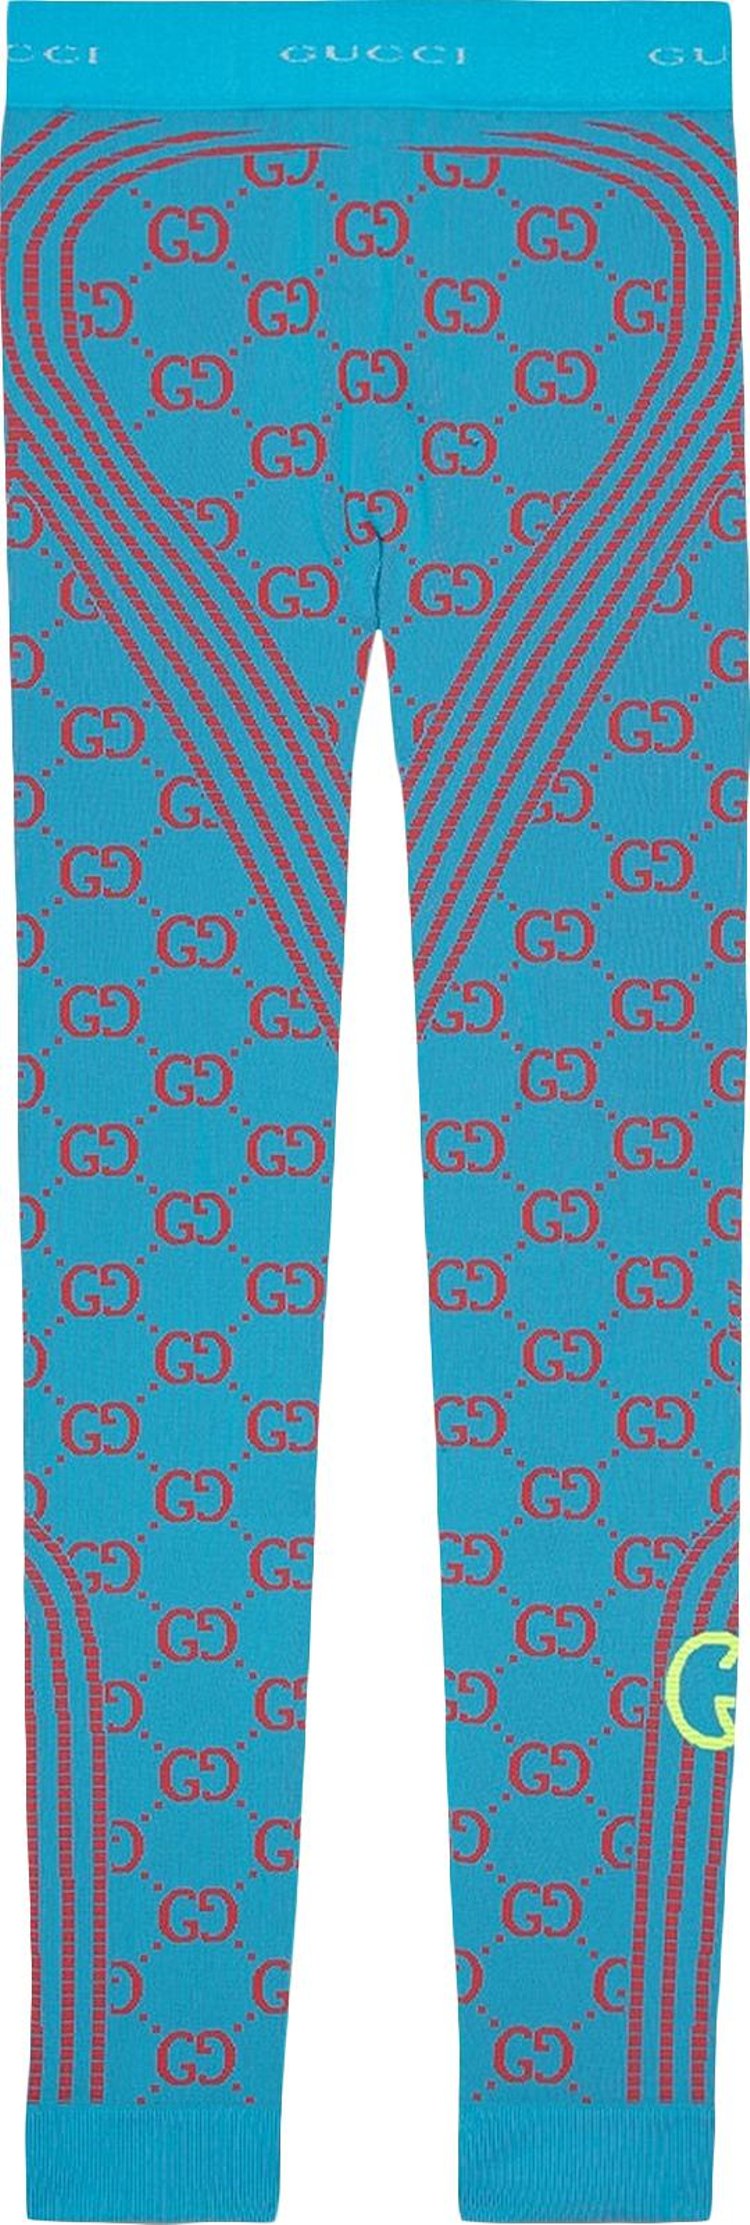 Gucci women's Gucci Love Parade leggings - buy for 382400 KZT in the  official Viled online store, art. 689203 XJEFV.5196_M_222